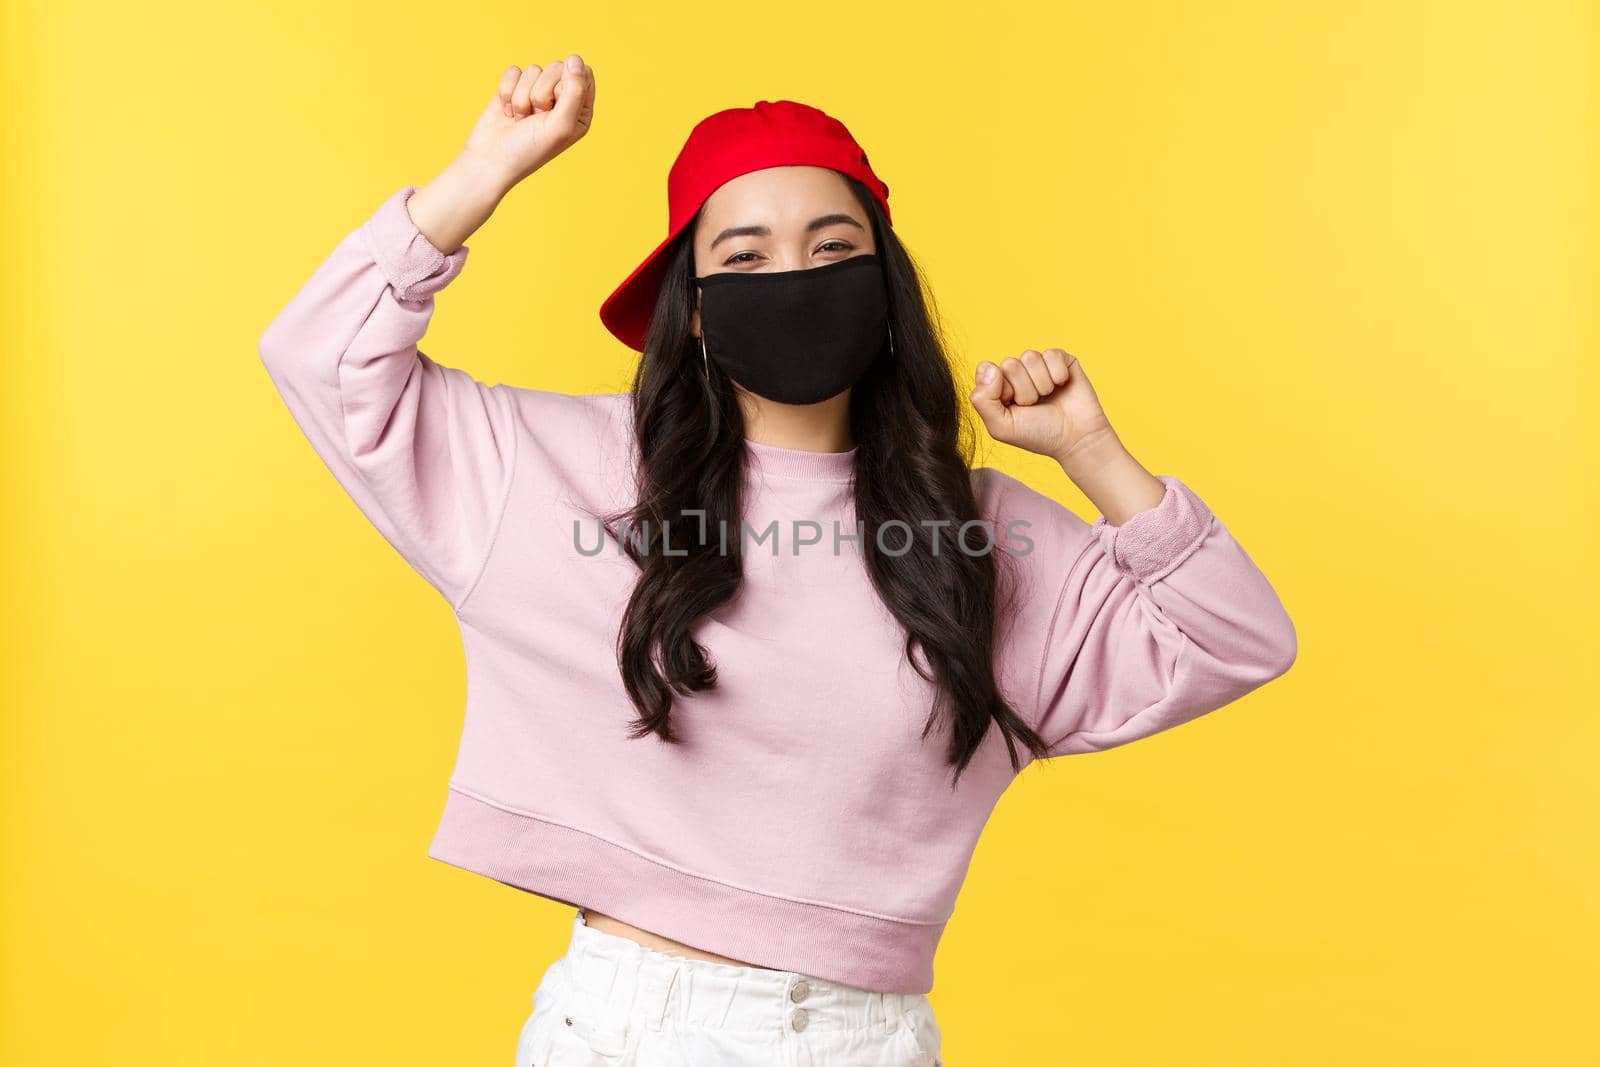 Covid-19, social-distancing lifestyle, prevent virus spread concept. Carefree excited asian girl in red cap and face mask, dancing with hands raised up, having good summertime, yellow background.